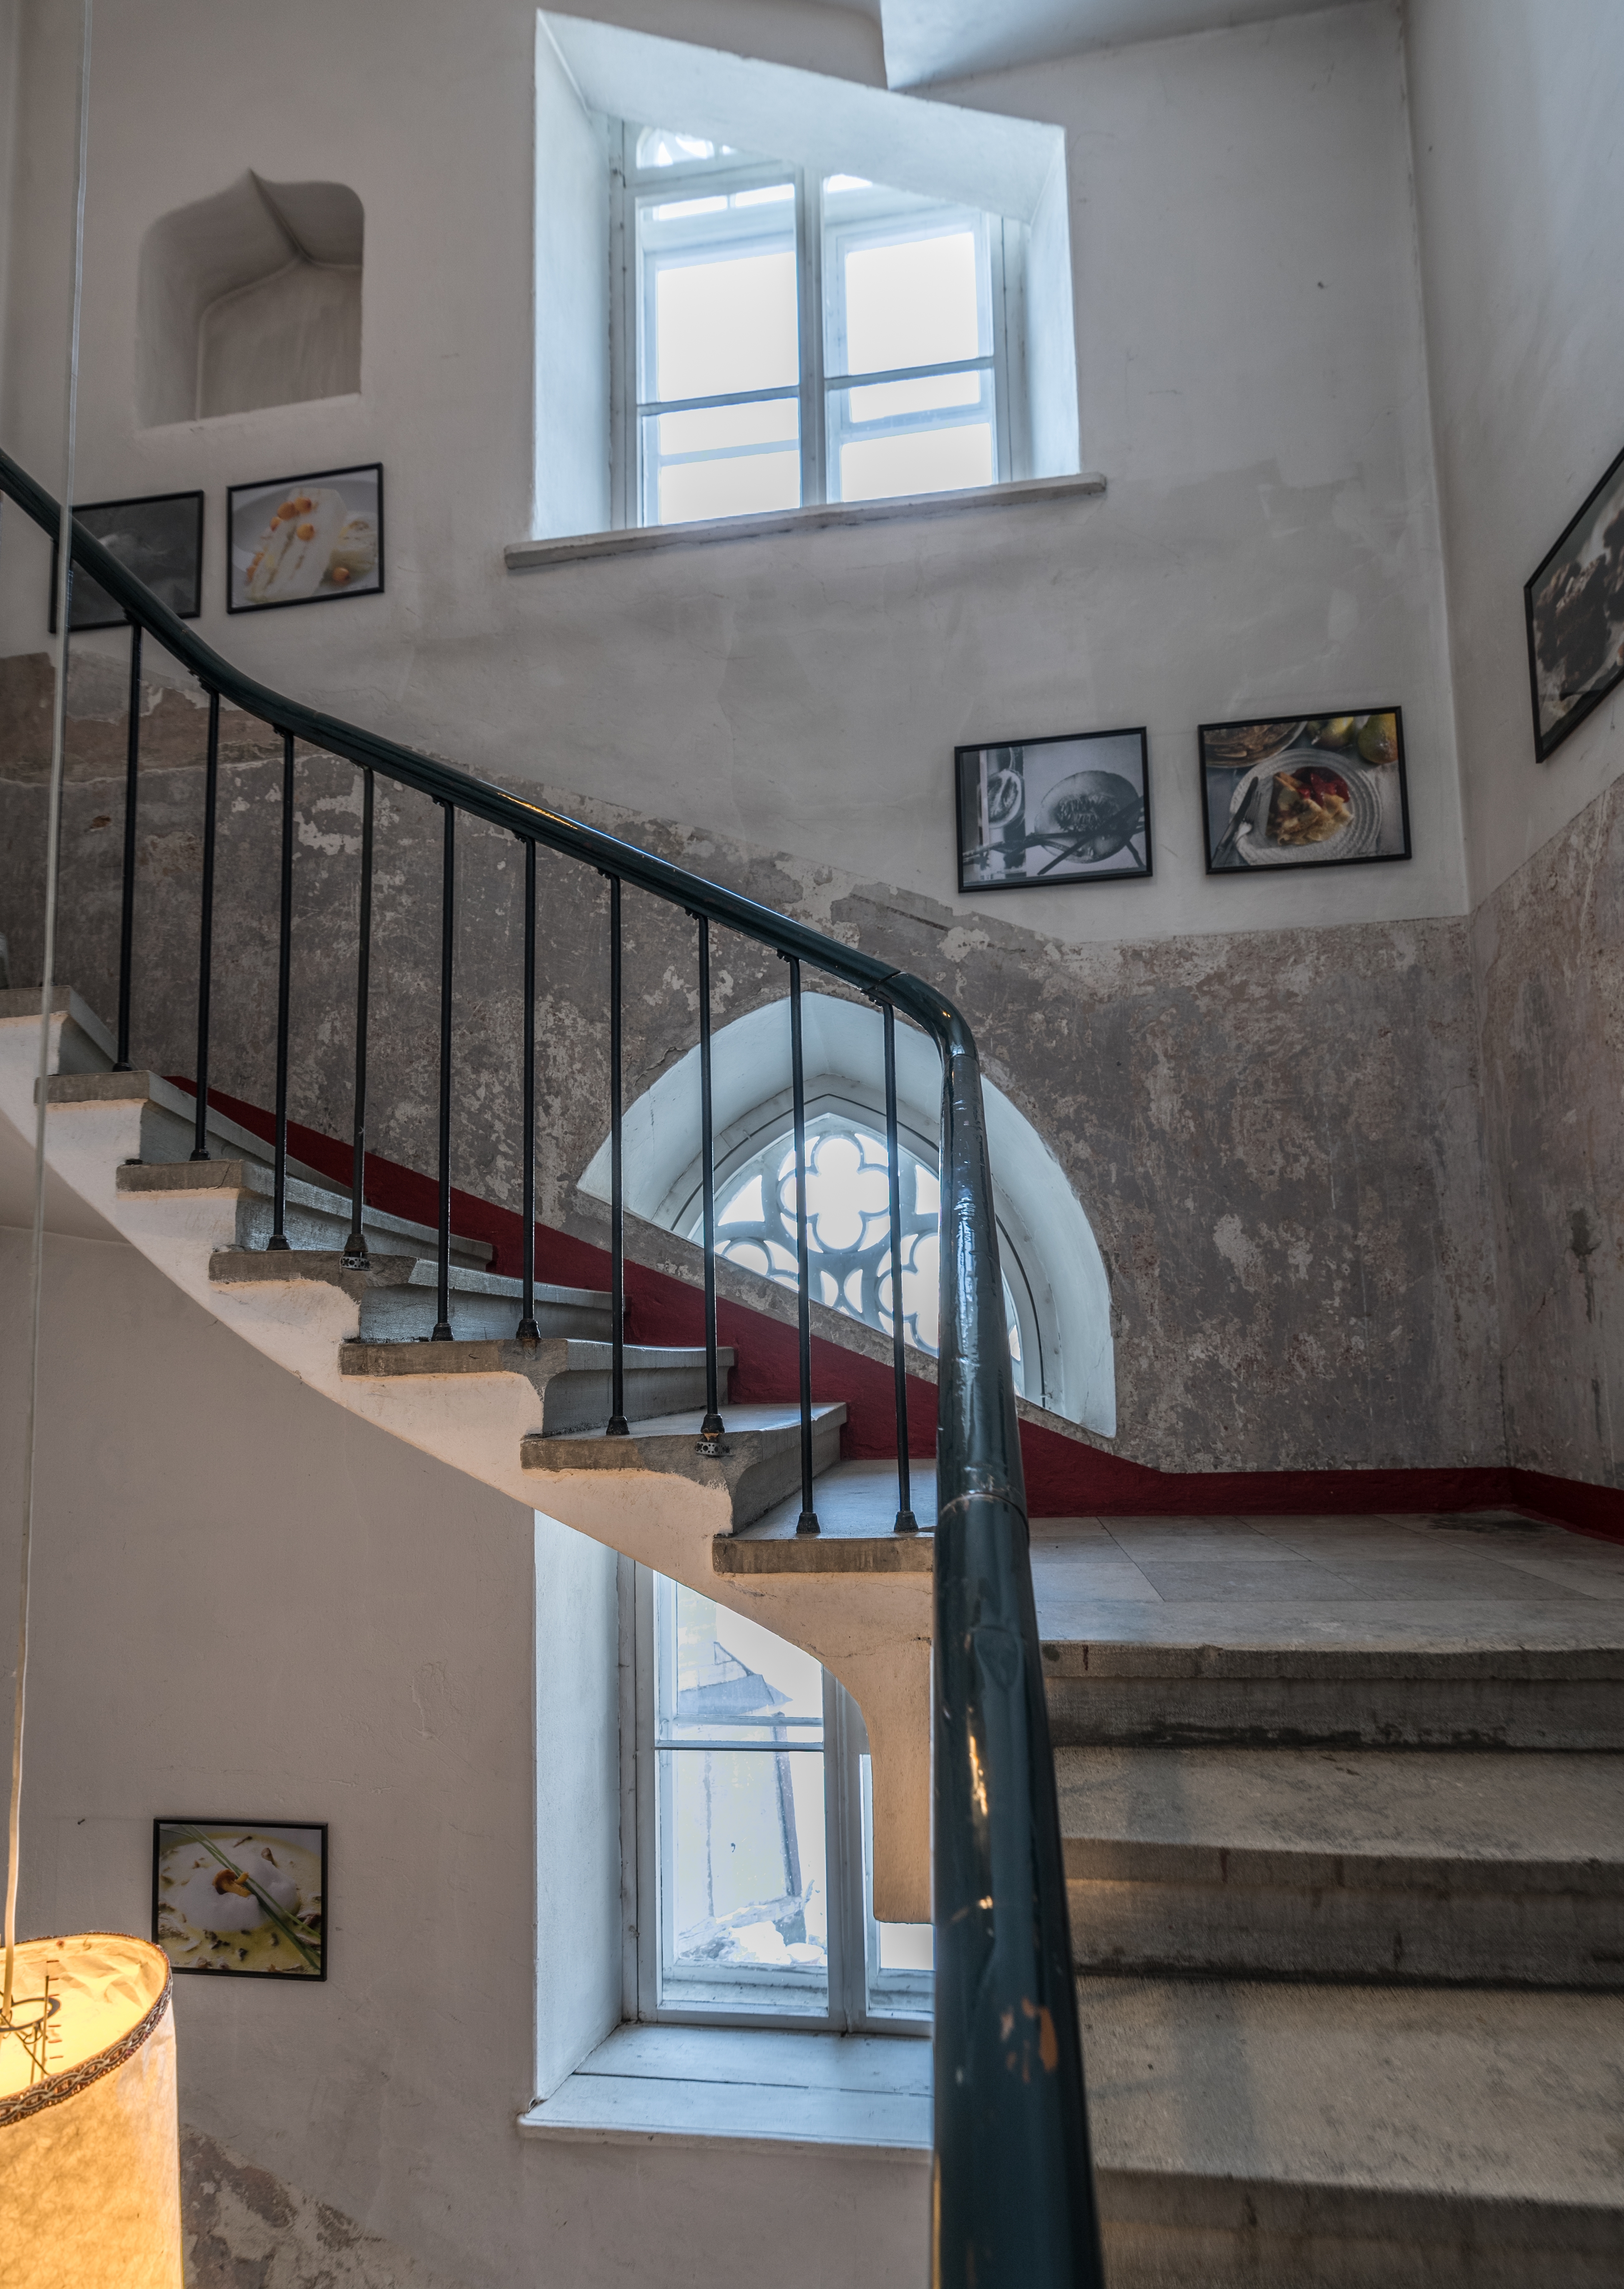 Photos hung along the walls of a staircase | Source: Shutterstock